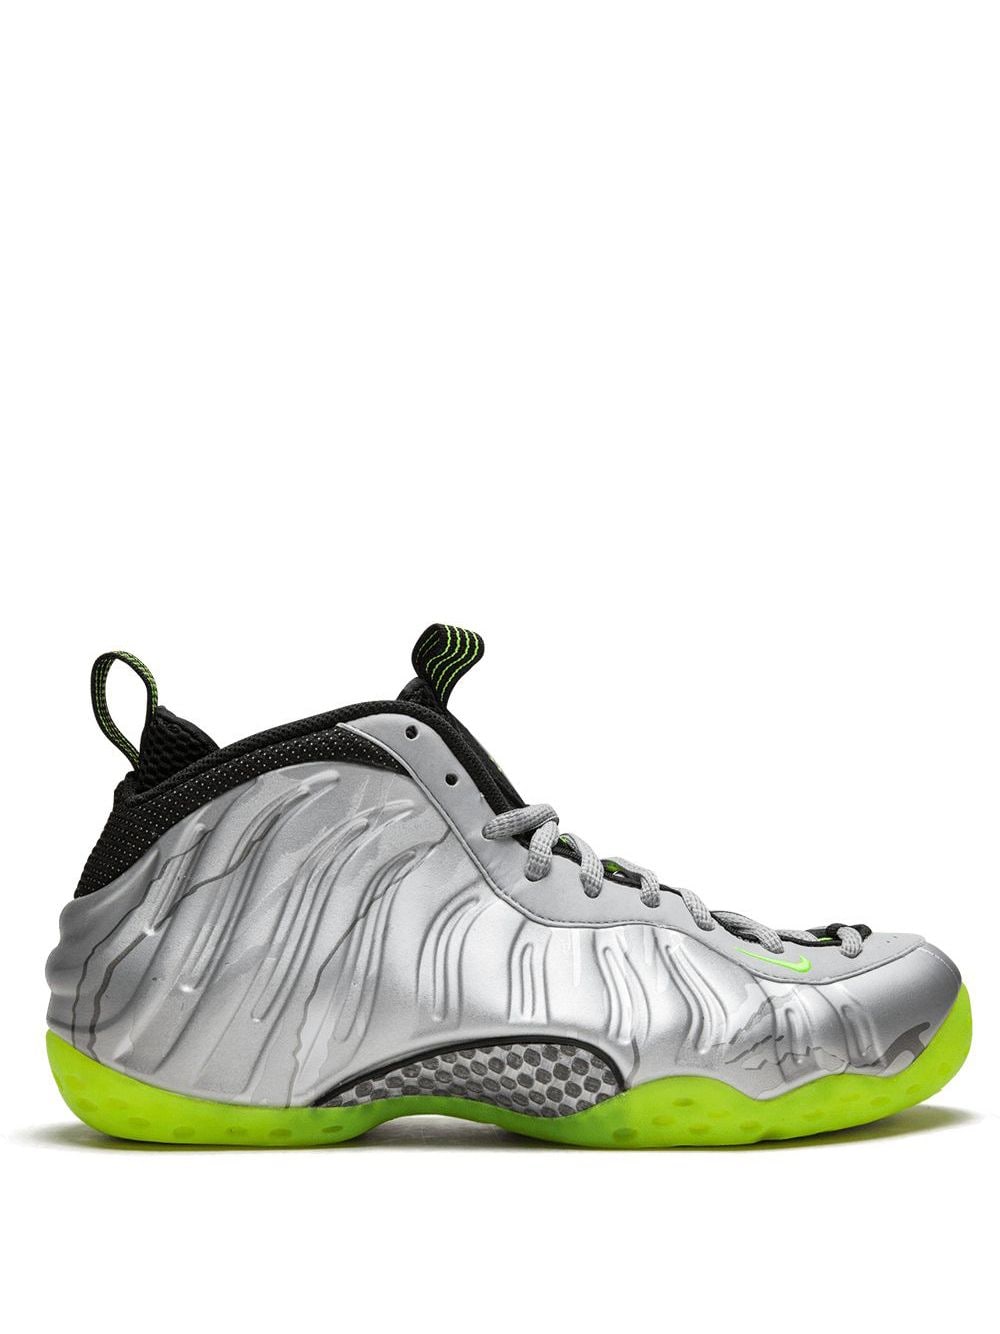 Image 1 of Nike baskets Air Foamposite